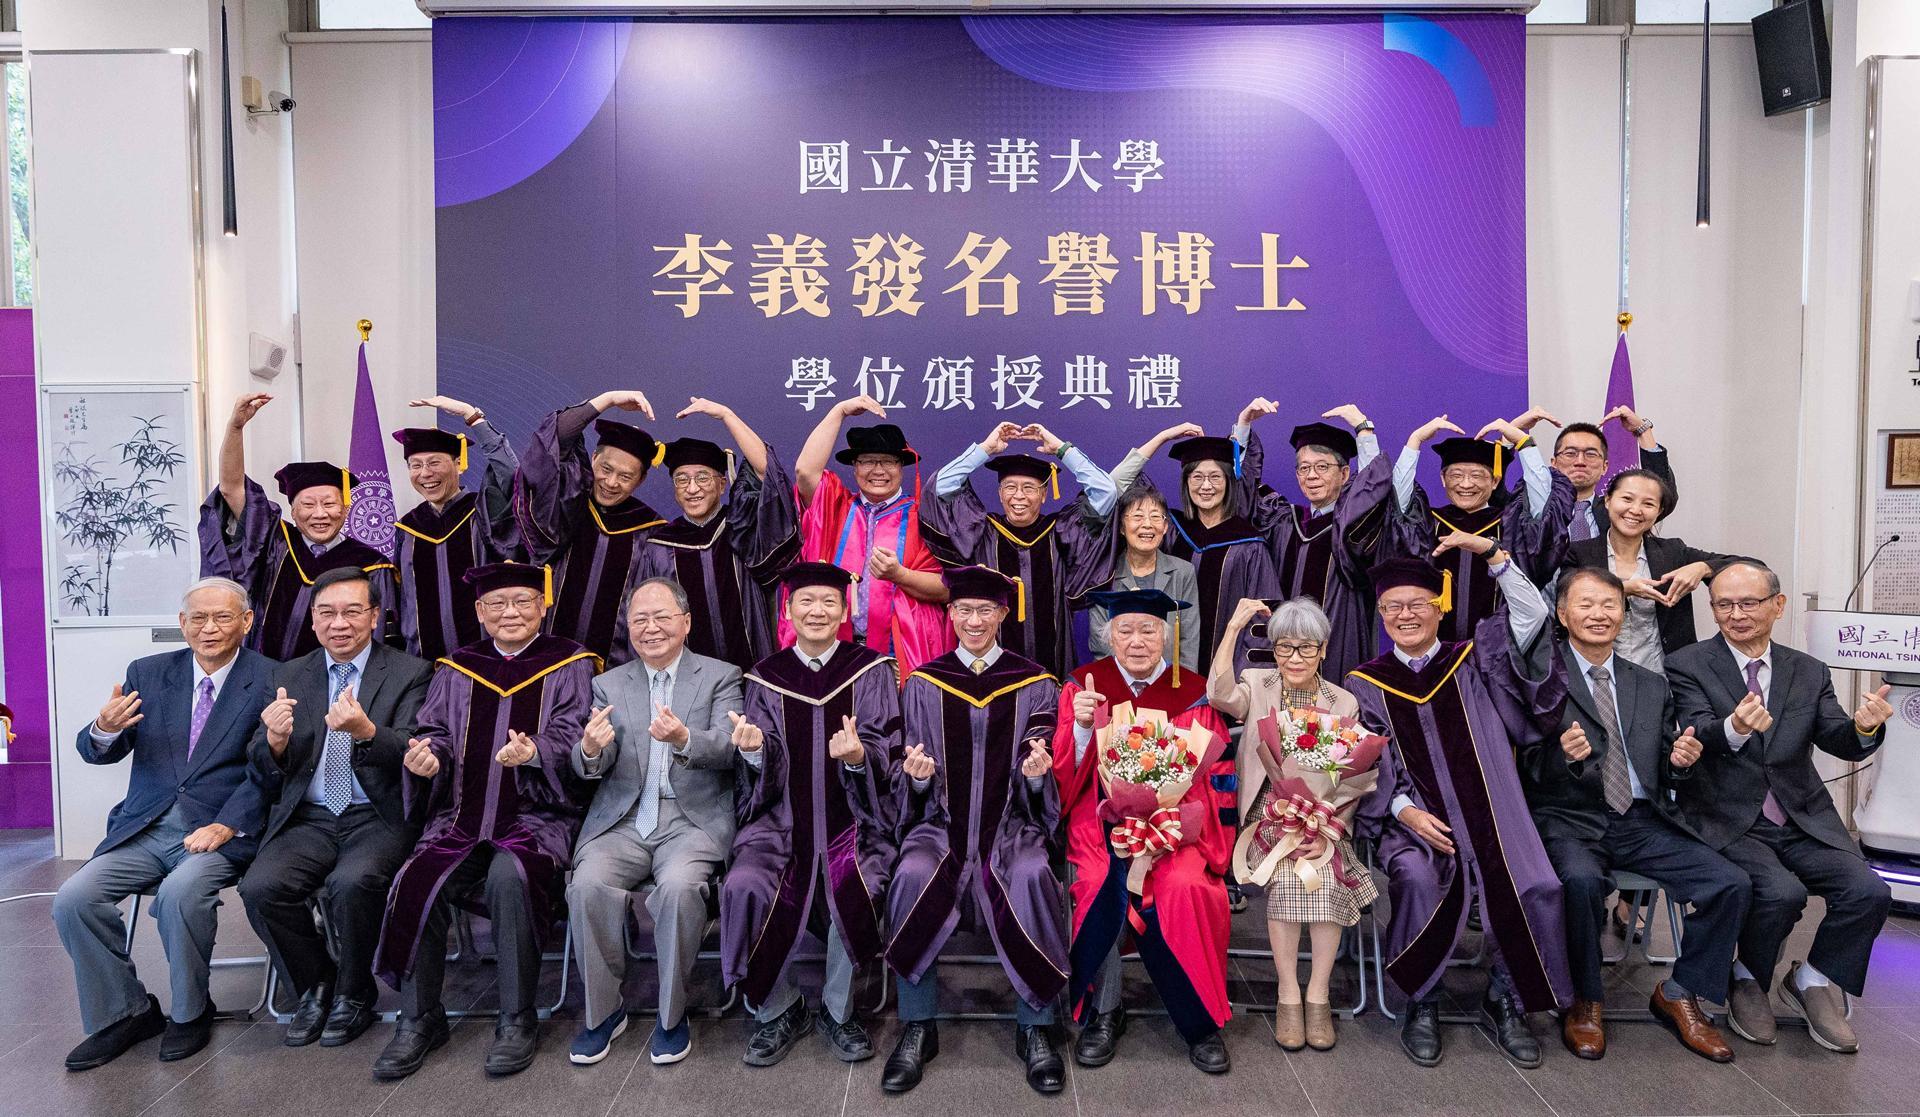 NTHU conferred an honorary doctorate upon Dr. Yi-Fa Lee (李義發) on November 14. Officials from NTHU gathered to offer their congratulations.